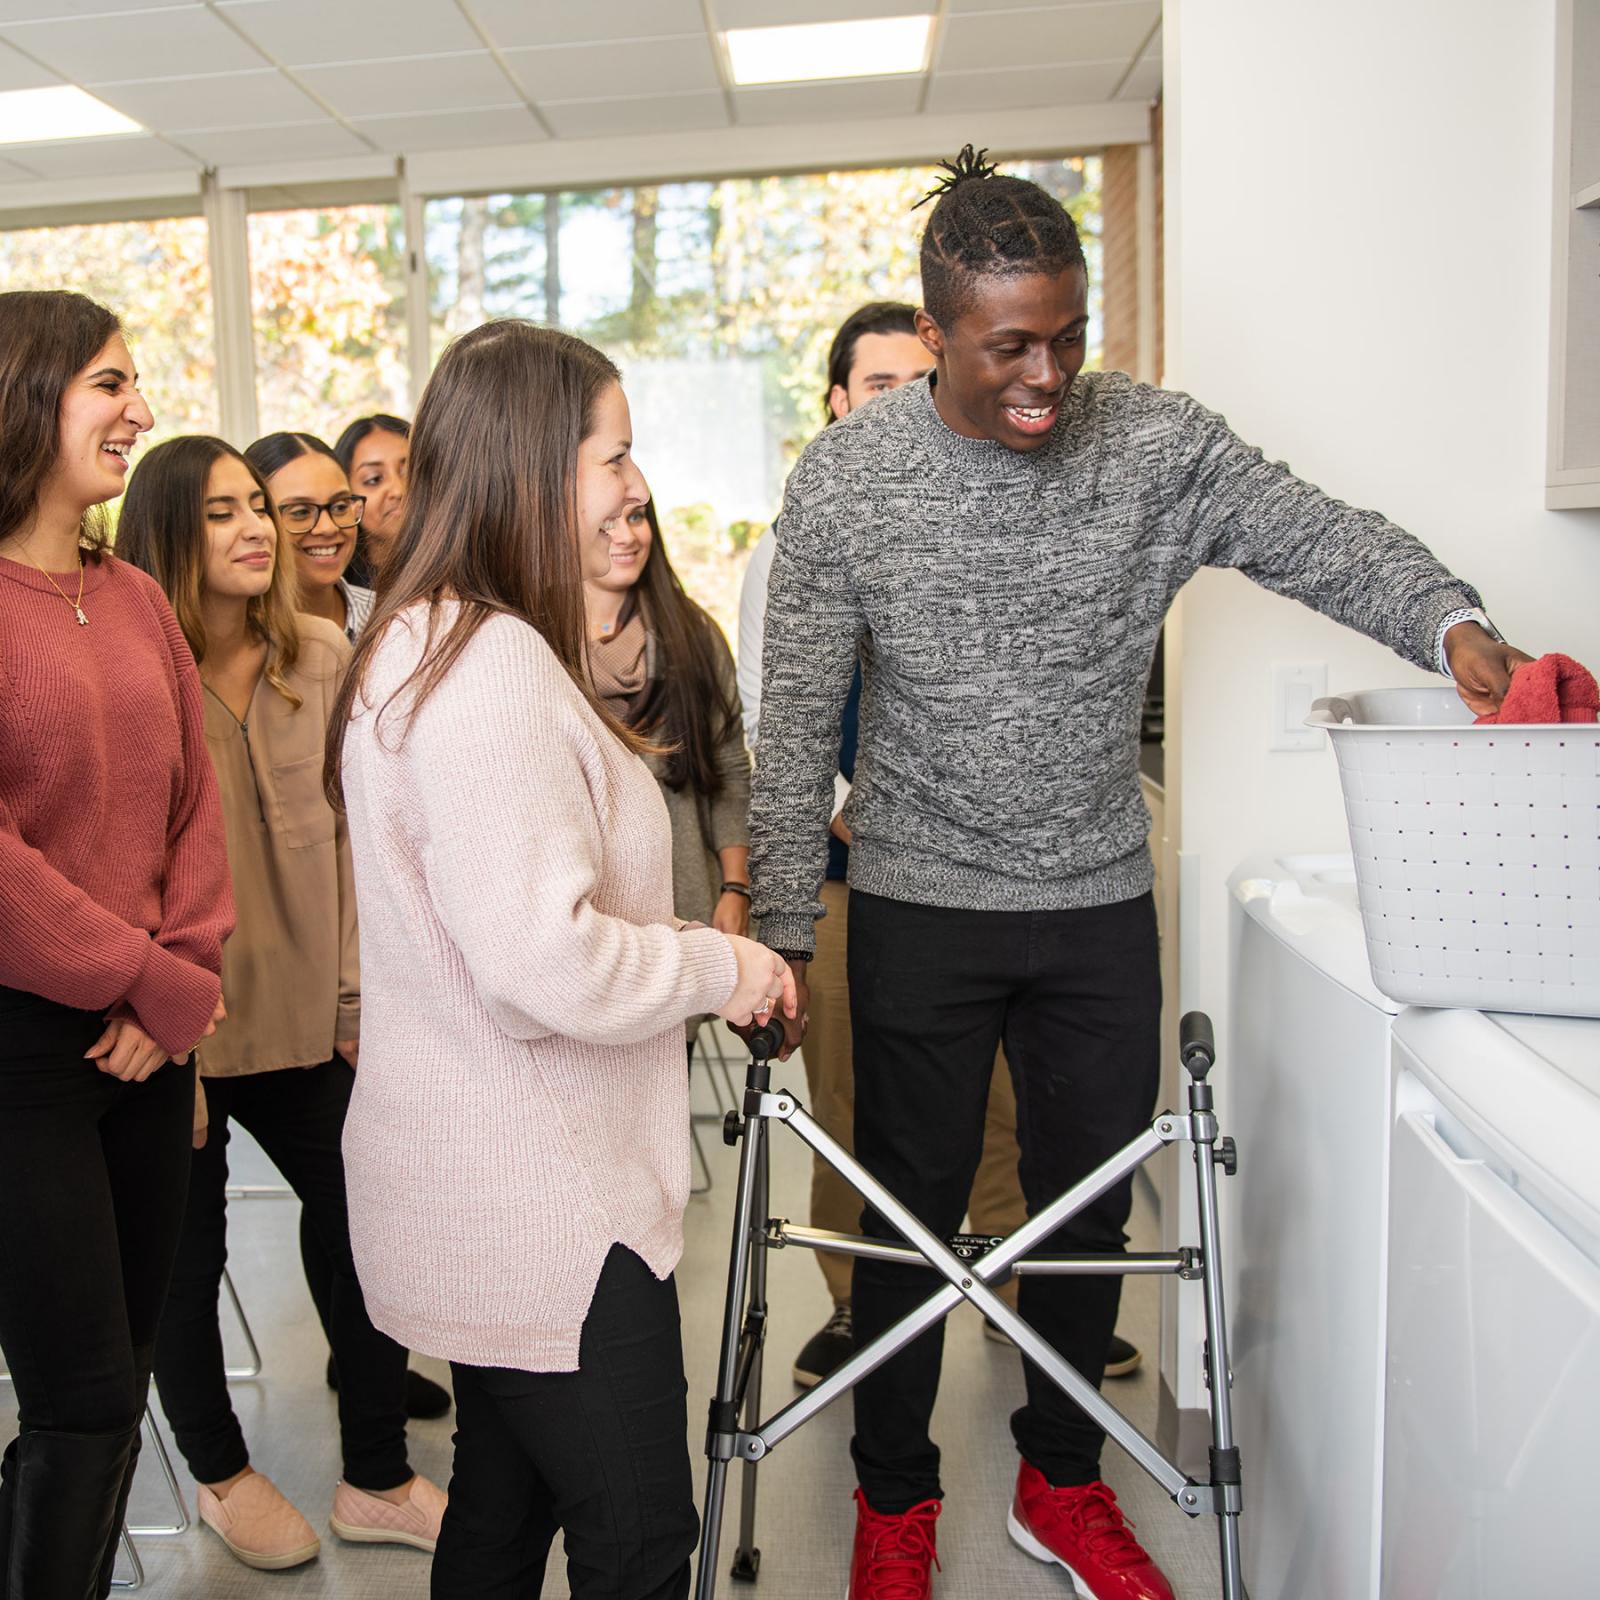 Students are helping a man with an injury to do the laundry.